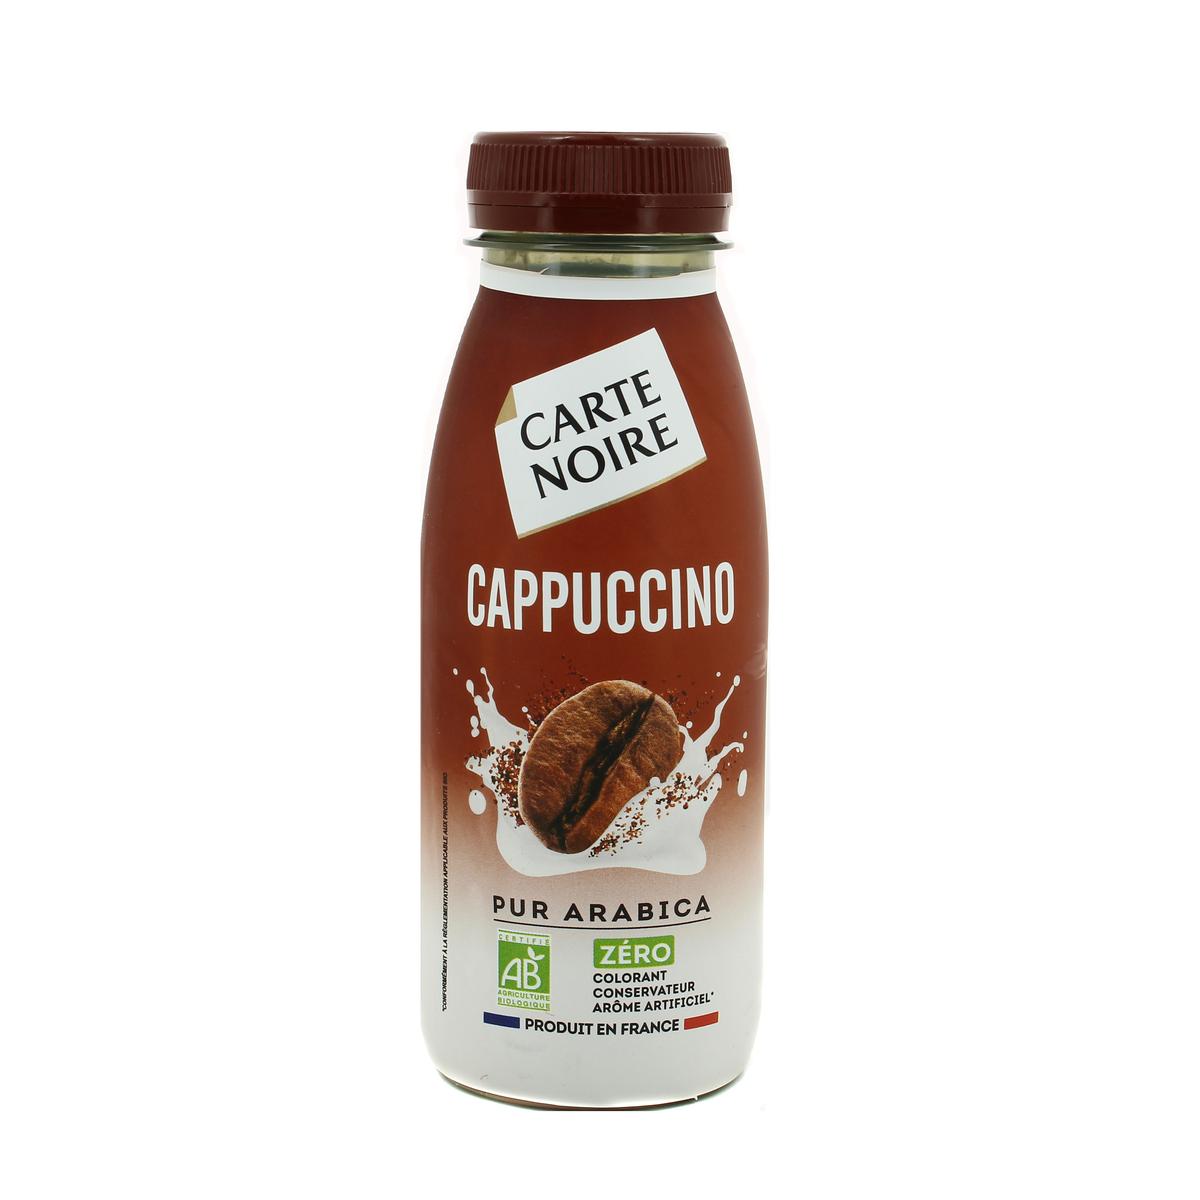 https://my-french-grocery.com/wp-content/uploads/2022/02/Capuccino.jpg